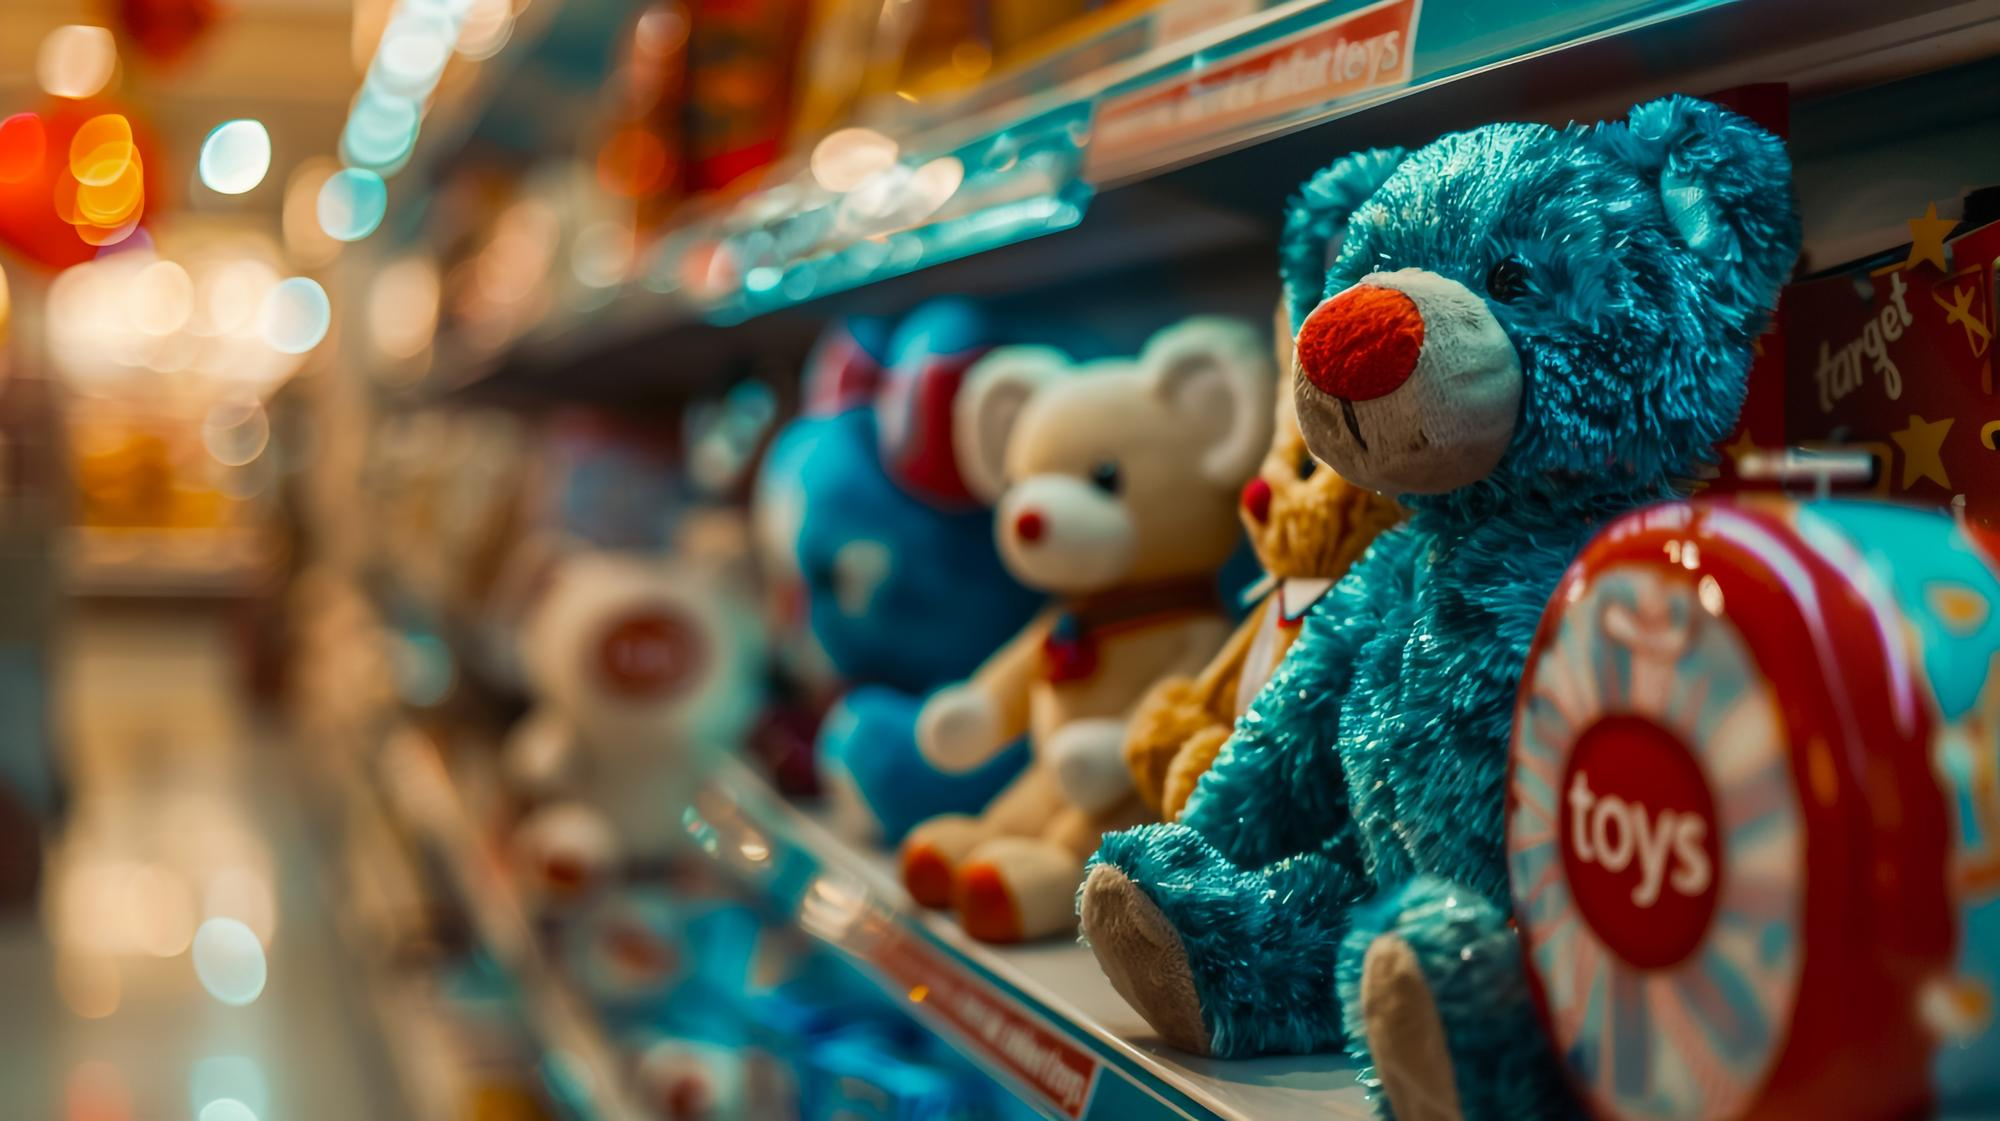 Stocking a toy store - how to do it?